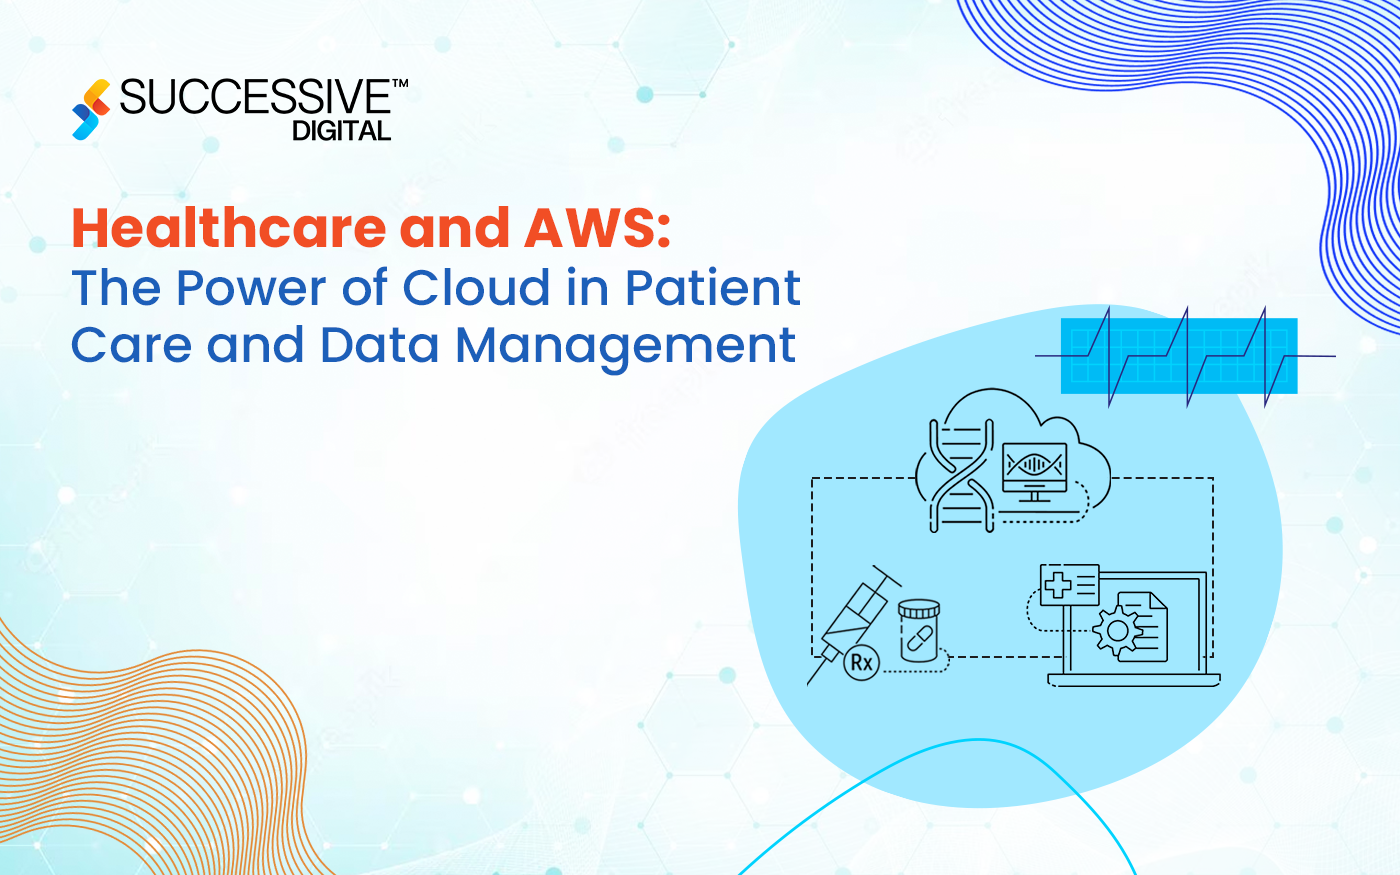 Healthcare and AWS: The Power of Cloud in Patient Care and Data Management